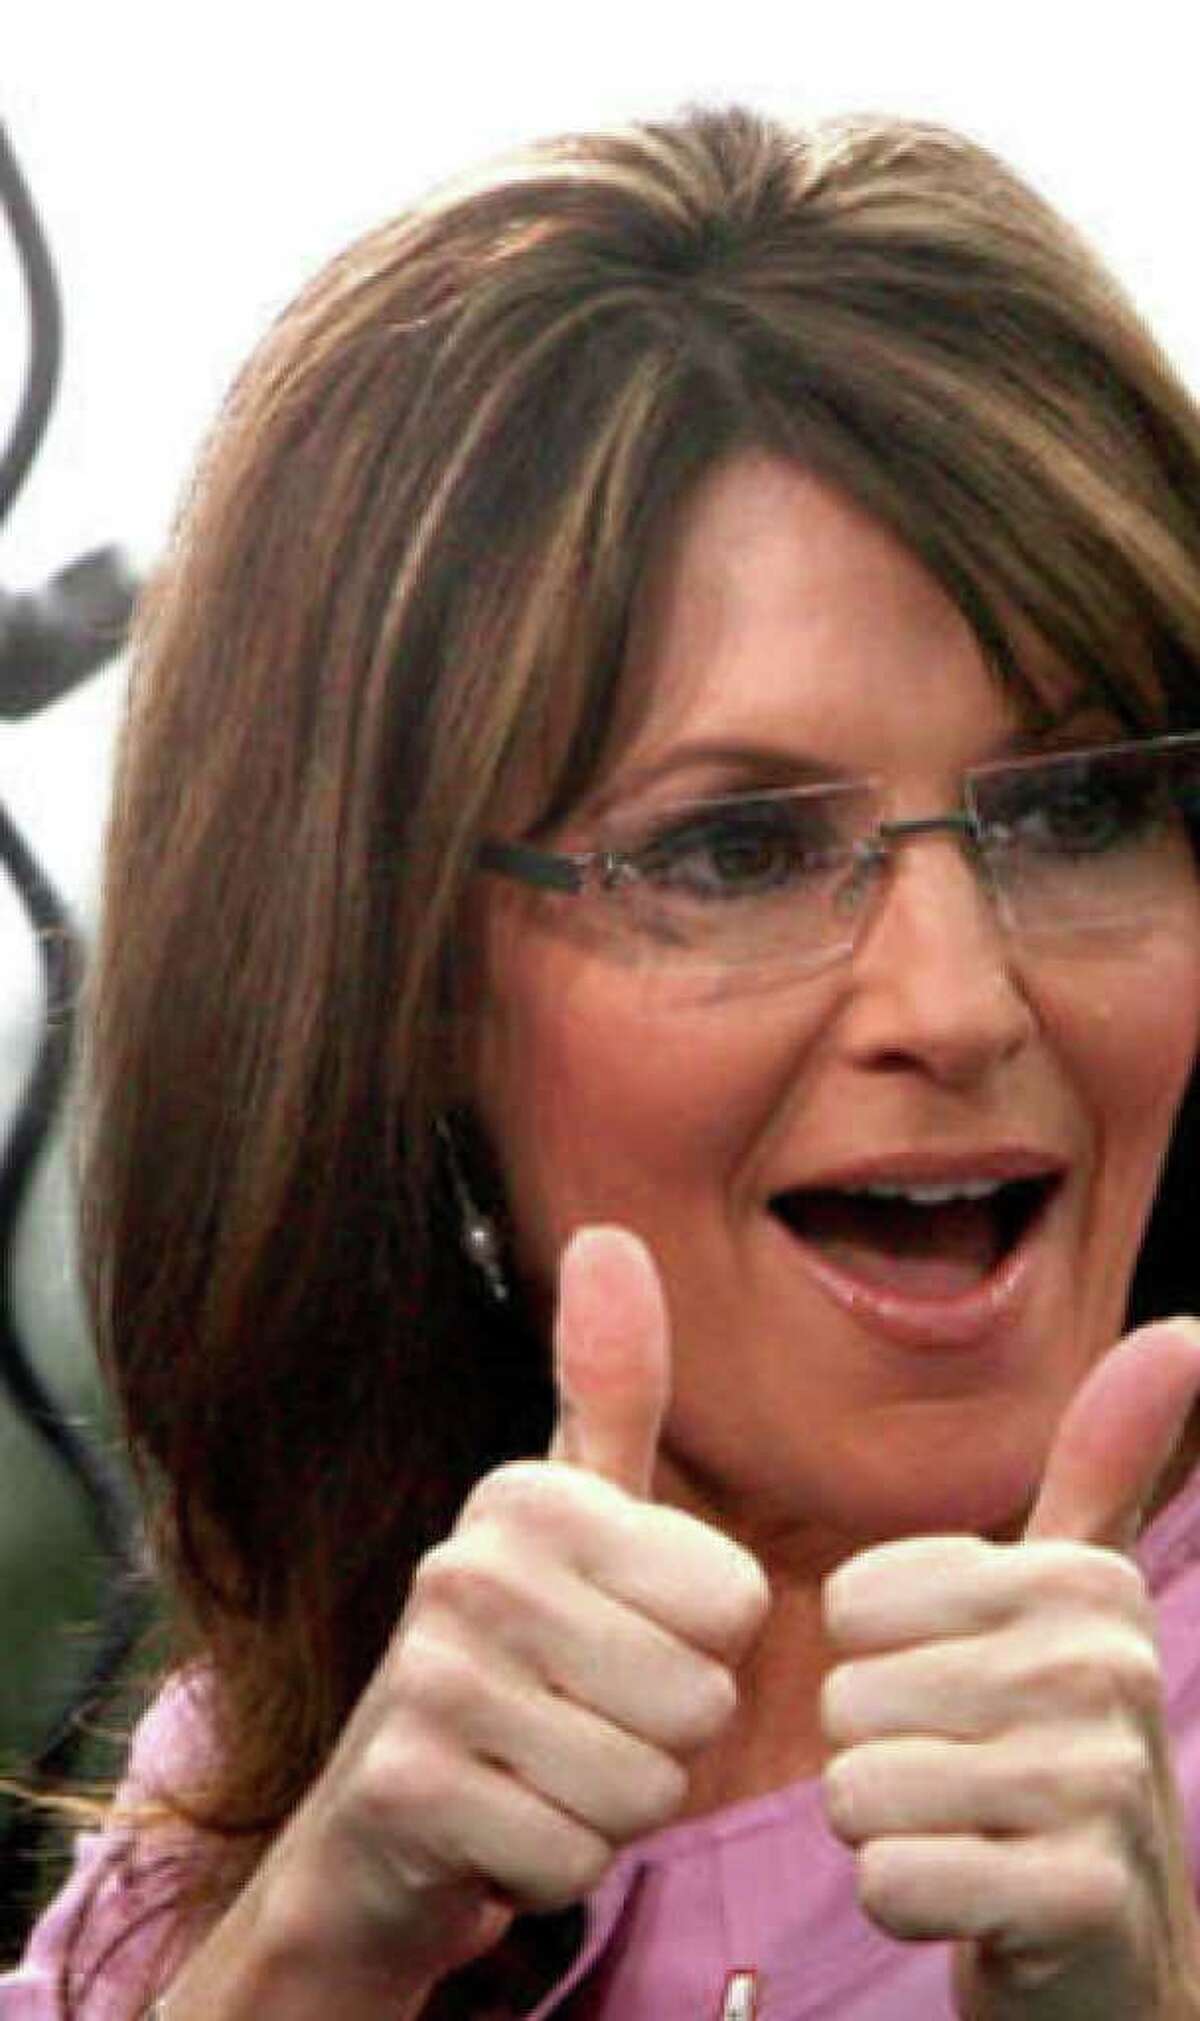 Letters and columns criticizing Sarah Palin bring out her supporters.